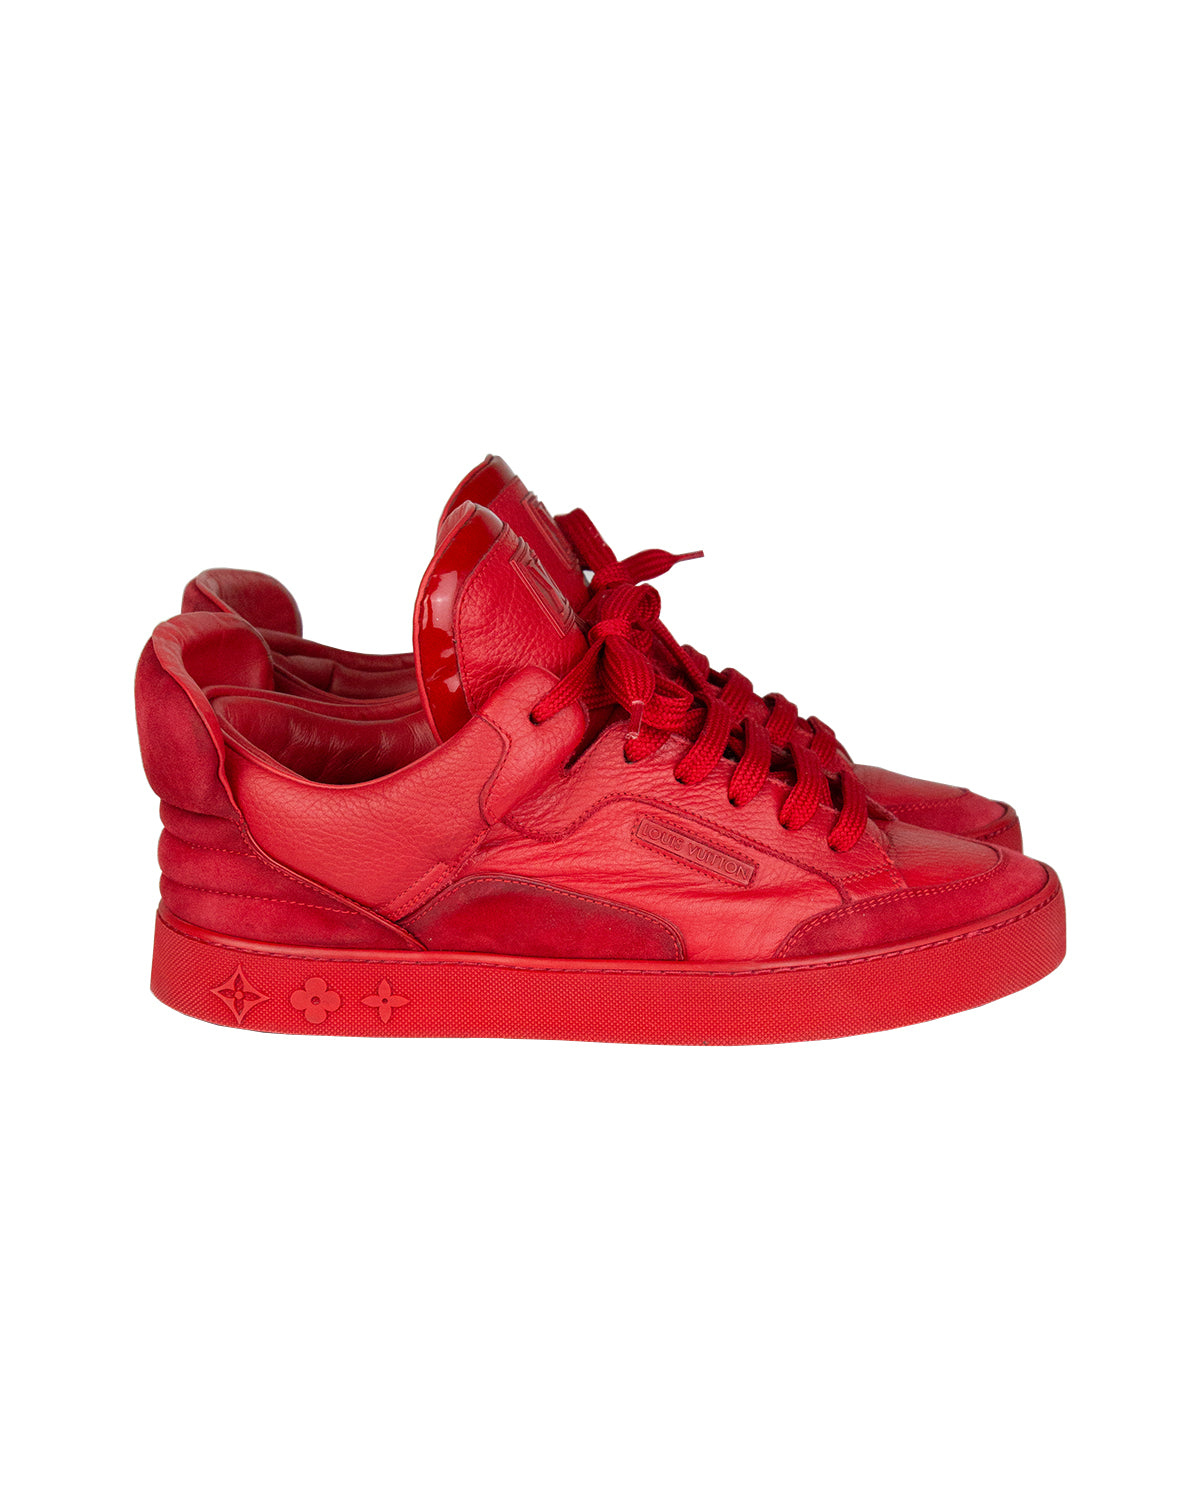 louis vuitton kanye west red dons size 7.5 right shoe